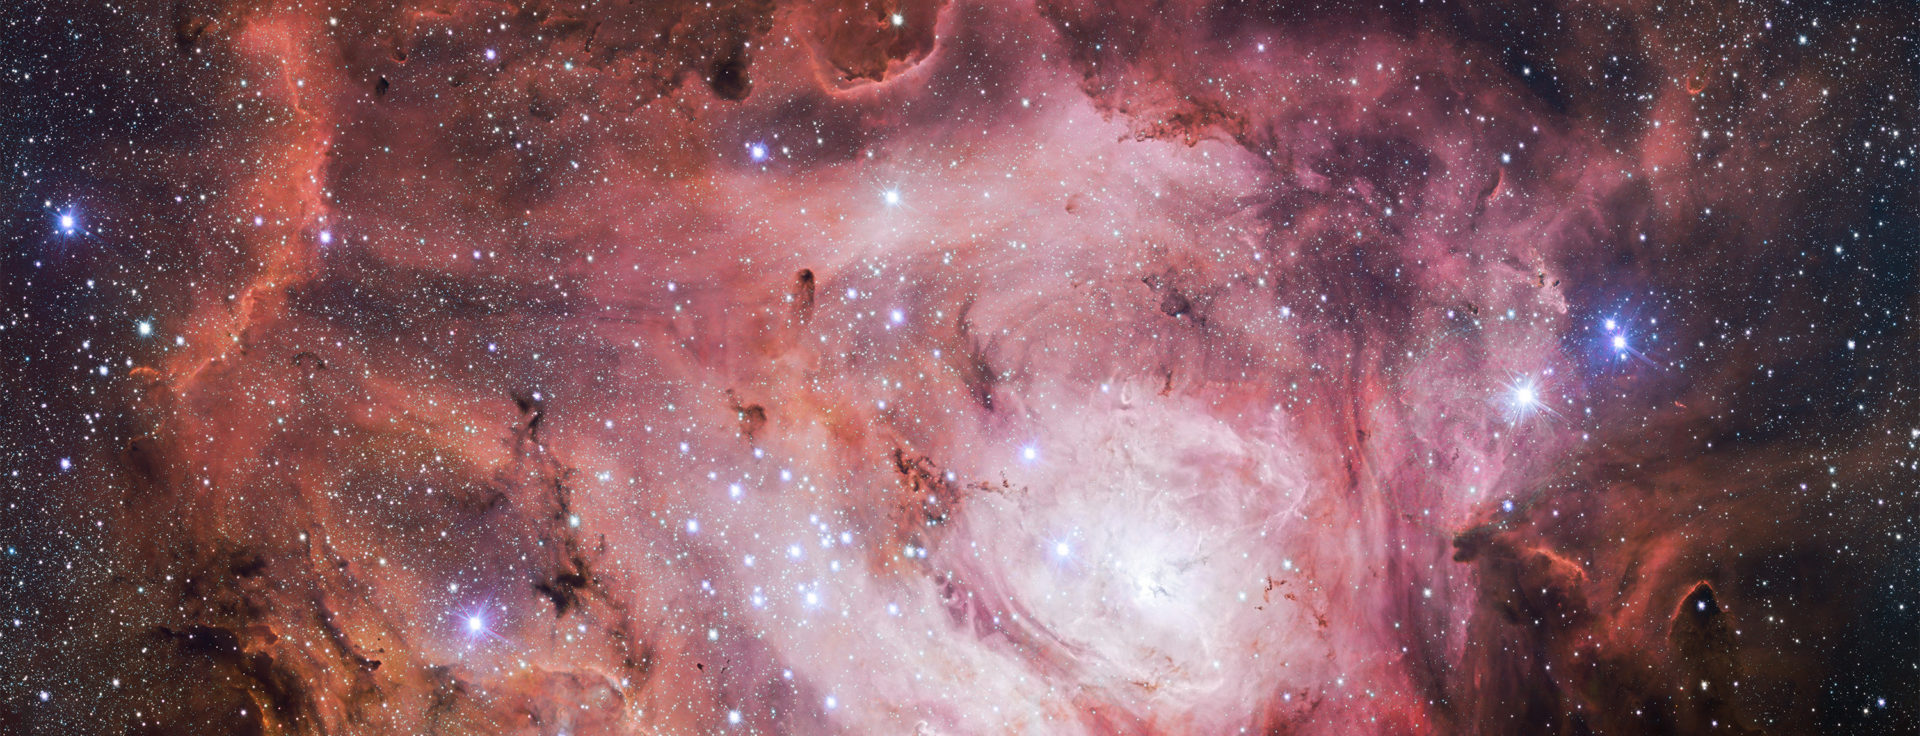 A complex and mesmerizing pink nebula with wisps of red among the stars